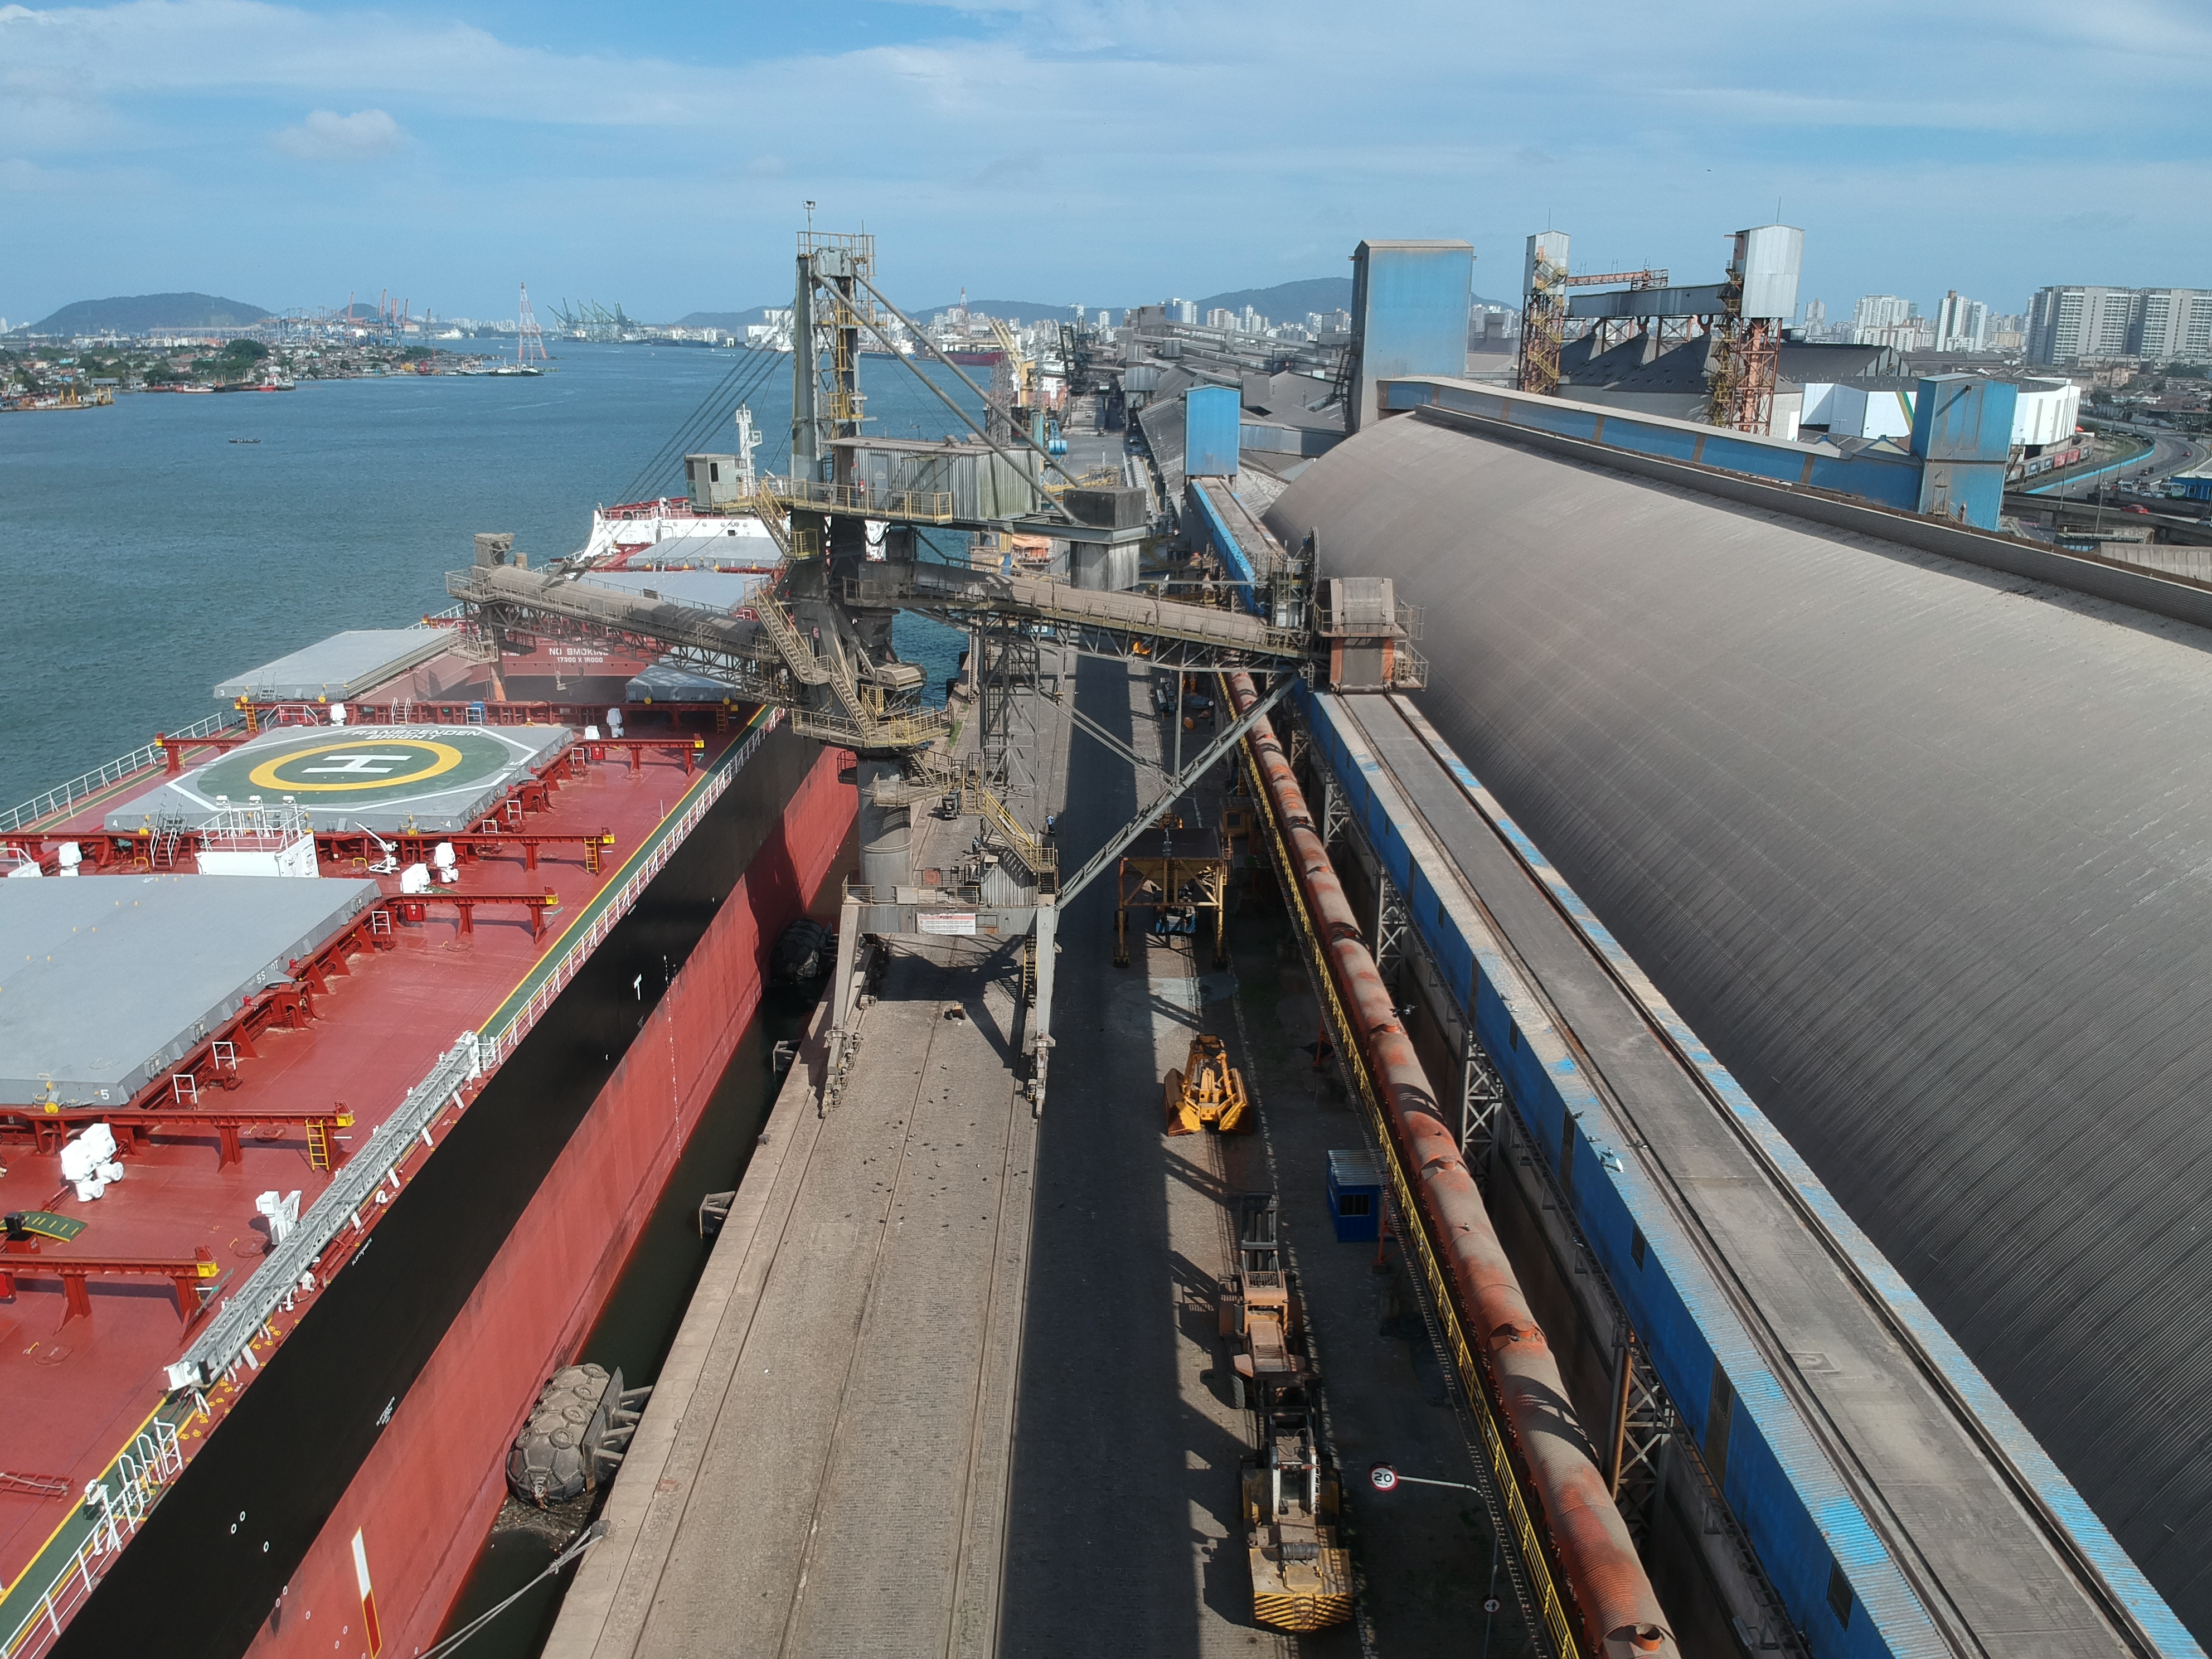 Reduced investment in vessels has led to a shortage of supply which, combined with rapidly increasing demand, has created strong market conditions for freight.